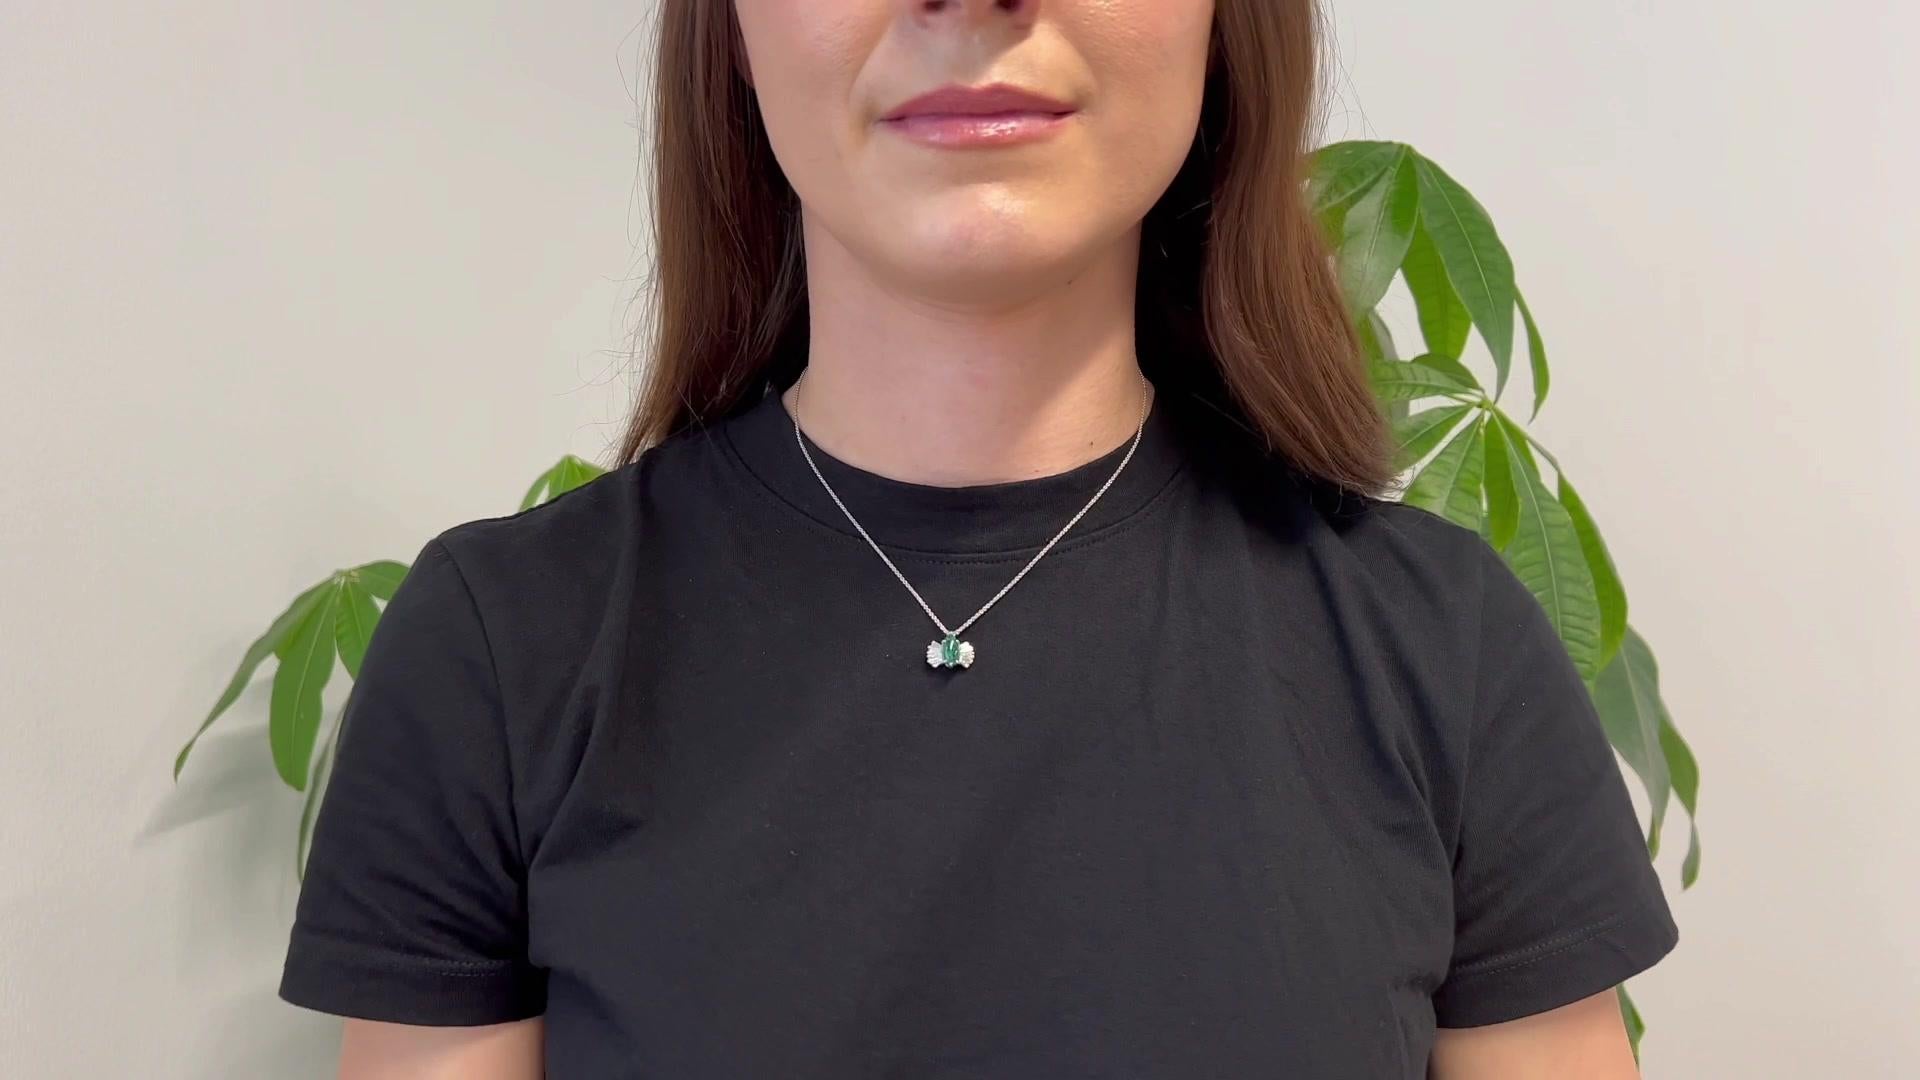 One Mid Century 1.41 Carats Emerald Platinum Pendant Necklace. Featuring one cabochon cut emerald of 1.41 carats. Accented by 10 tapered baguette cut diamonds with a total weight of approximately 0.45 carat, graded F color, VS clarity. The pendant